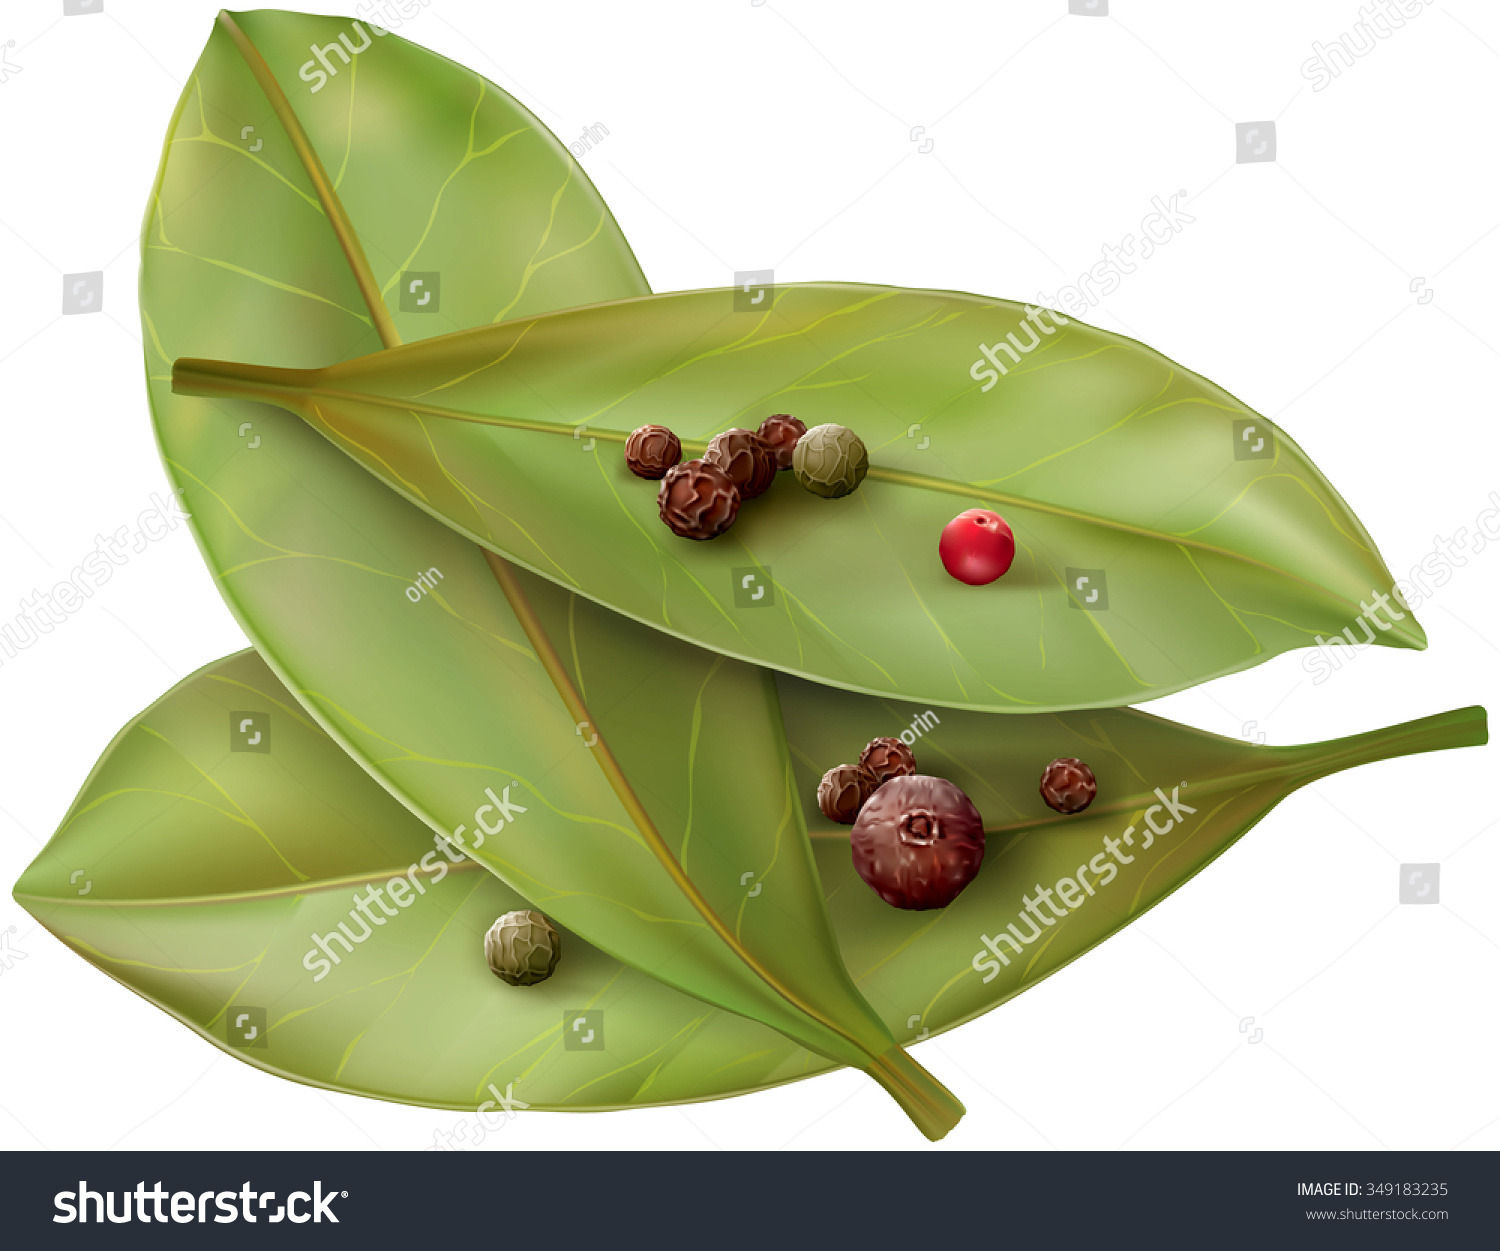 SVG of Bay leaves from the colored mix pepper corns. Vector illustration svg